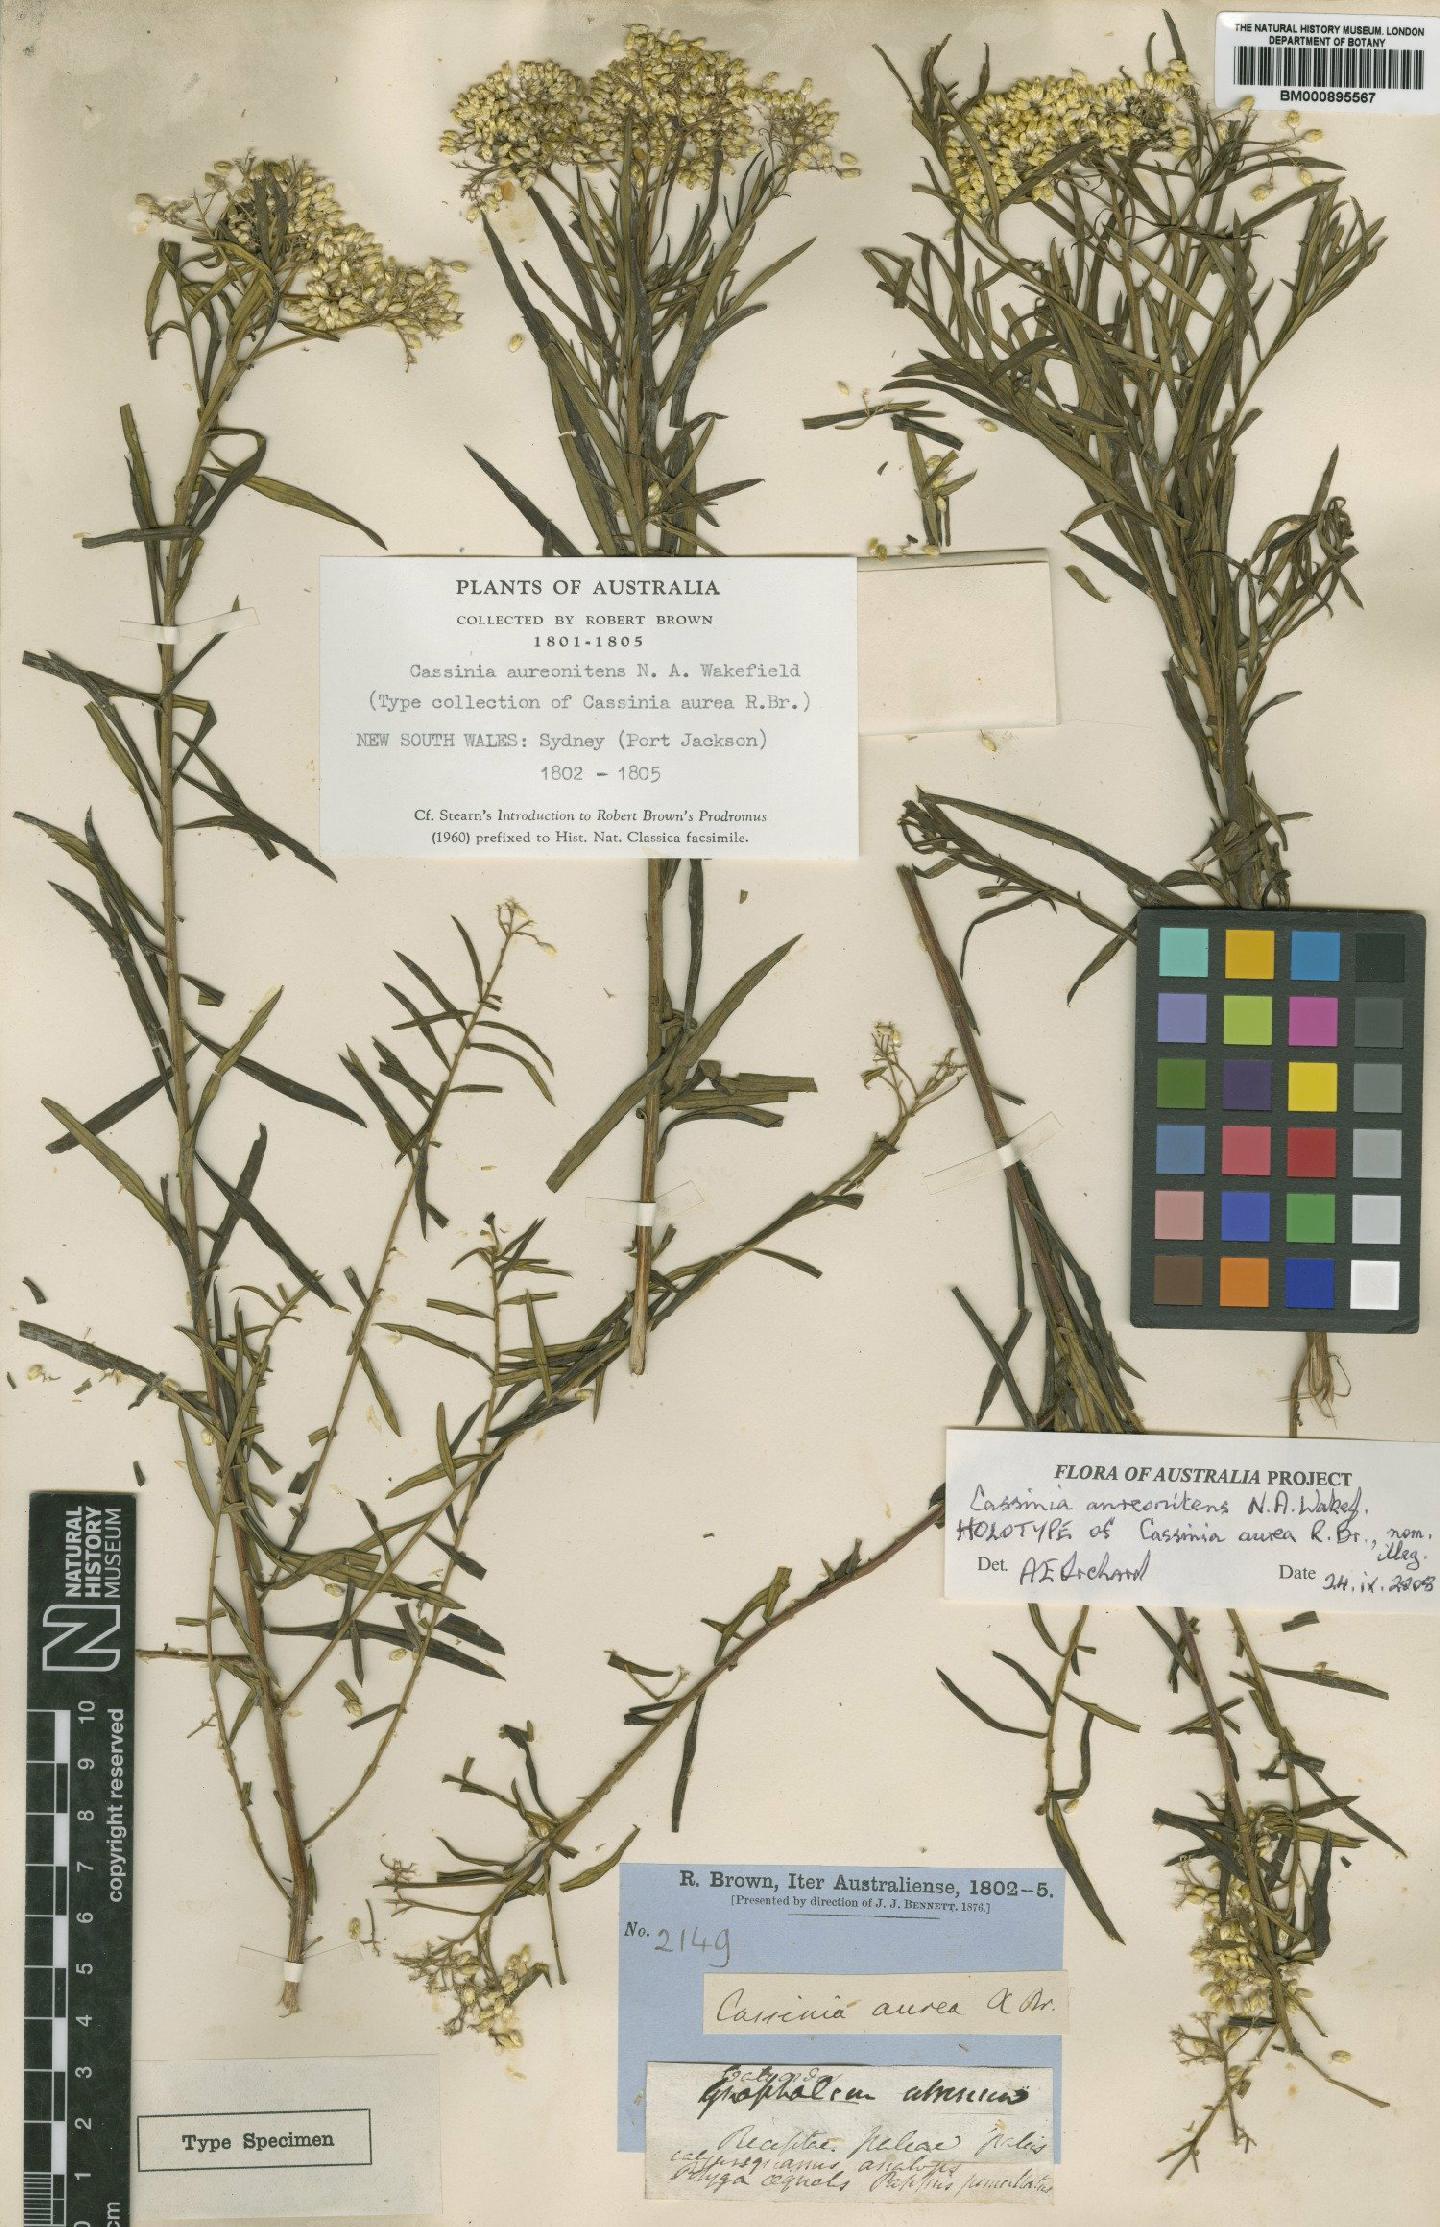 To NHMUK collection (Cassinia aureonitens N.A.Wakef.; Holotype; NHMUK:ecatalogue:500392)